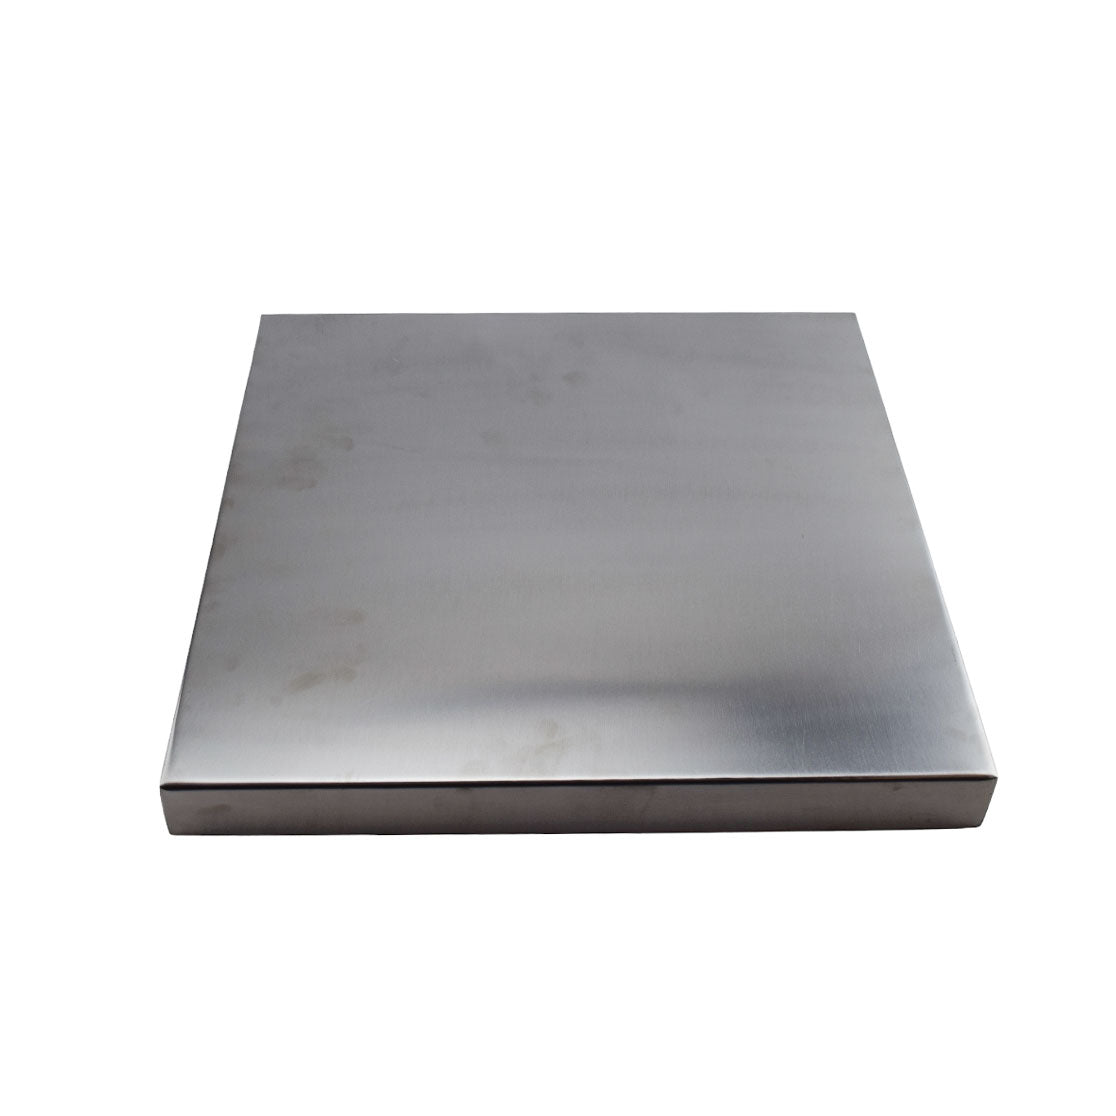 Stainless square basin